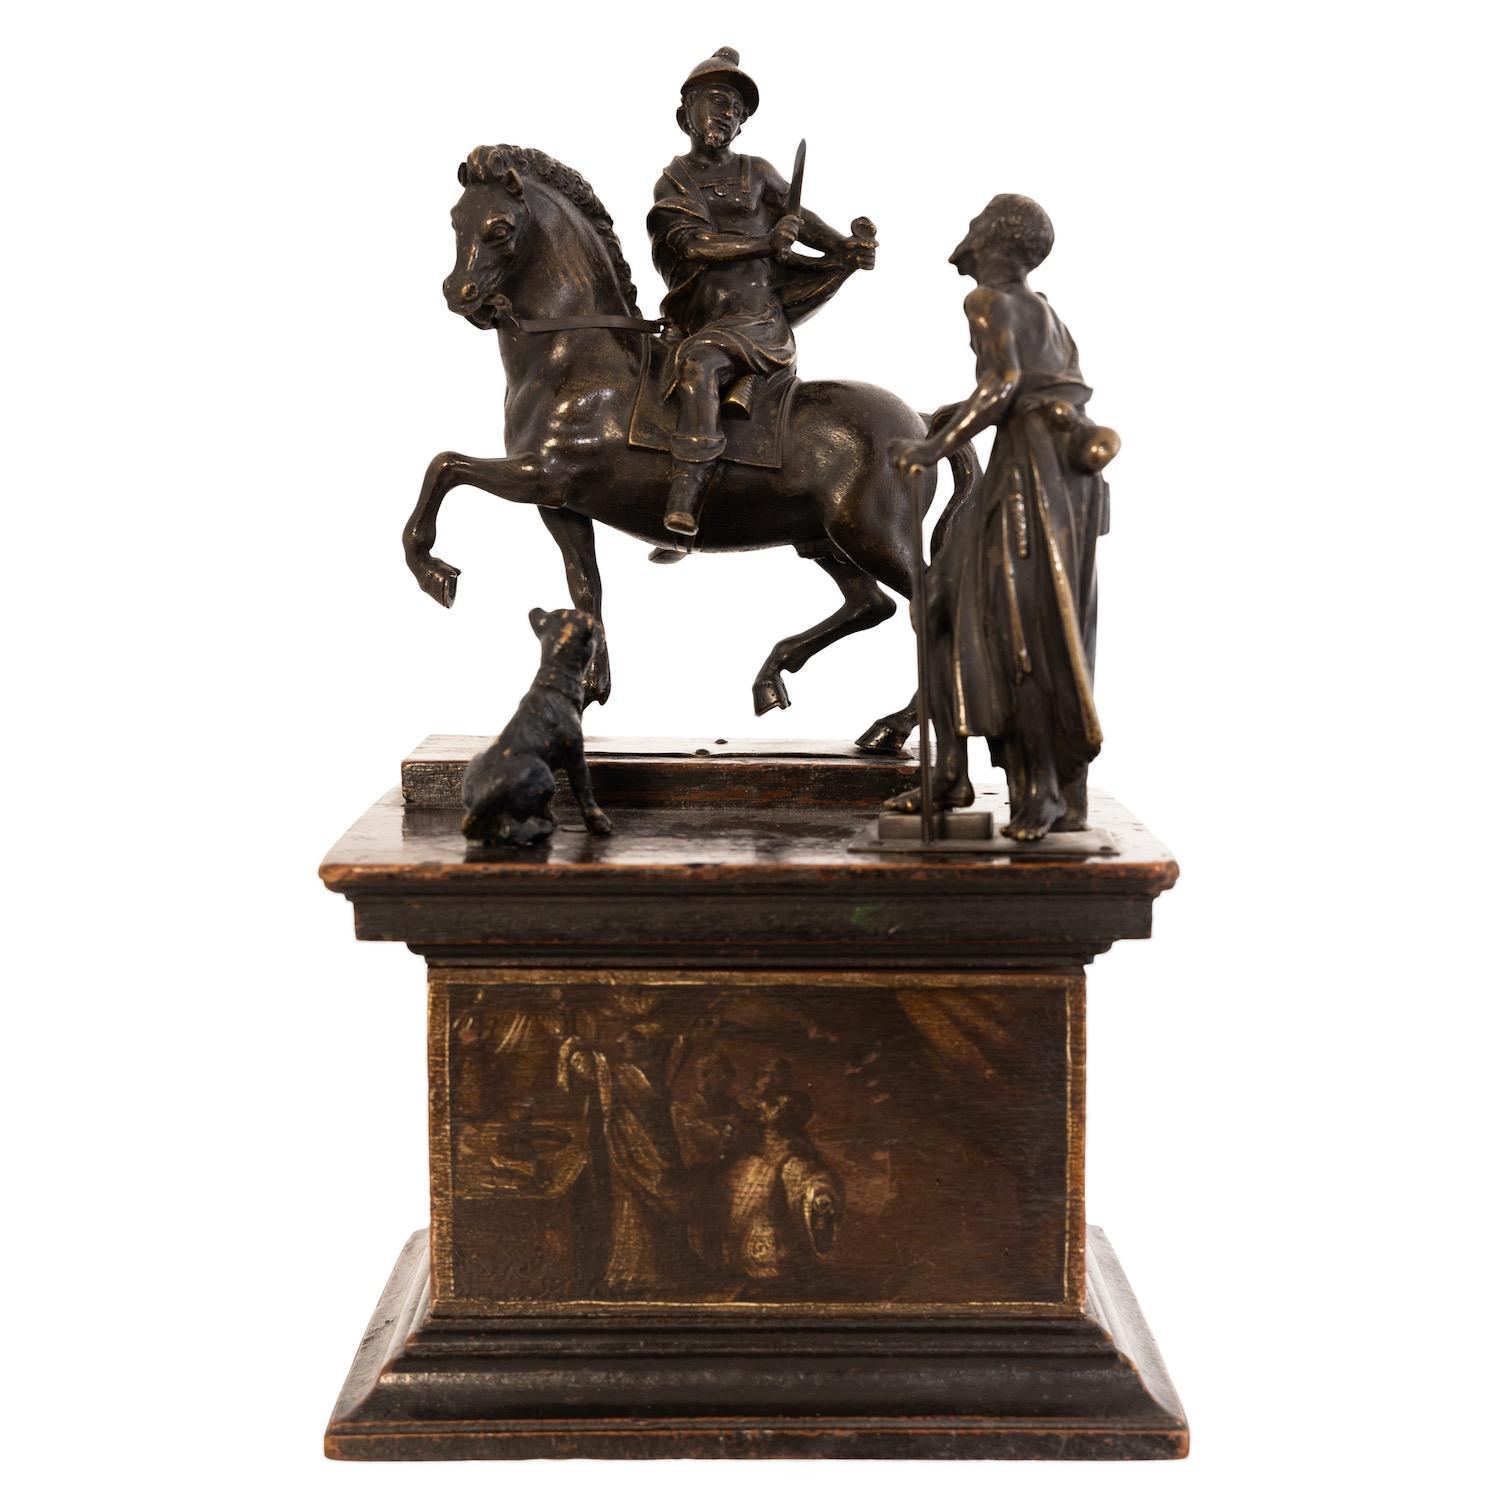 Group of bronze figures on a rectangular profiled wooden pedestal with scenic painting on all sides. Representation of St. Martin on horseback, who is about to share his coat with the beggar. The beggar is accompanied by a dog. Finely worked with